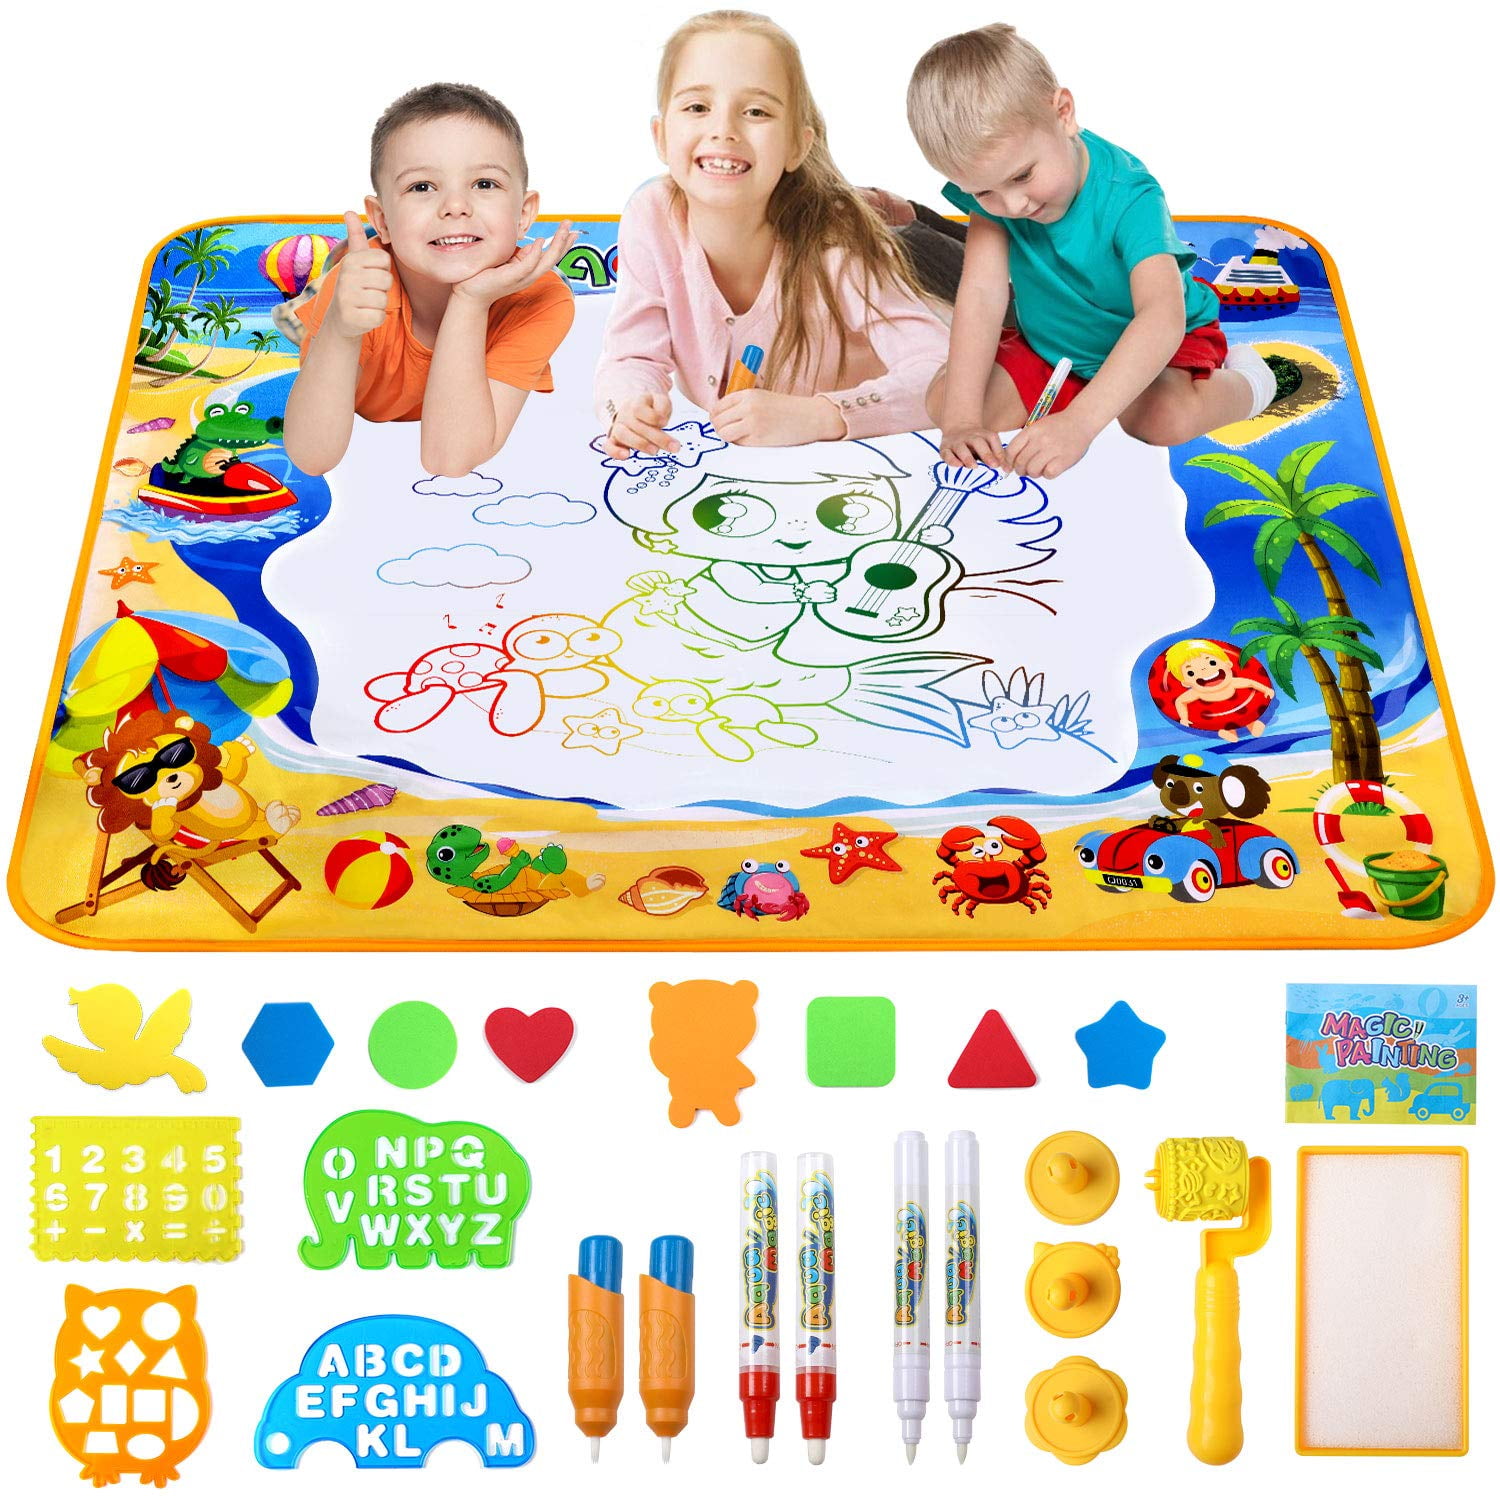 Magic Drawing Water Pen Painting Doodle Mat Board Kids Painting Toy GXJ 